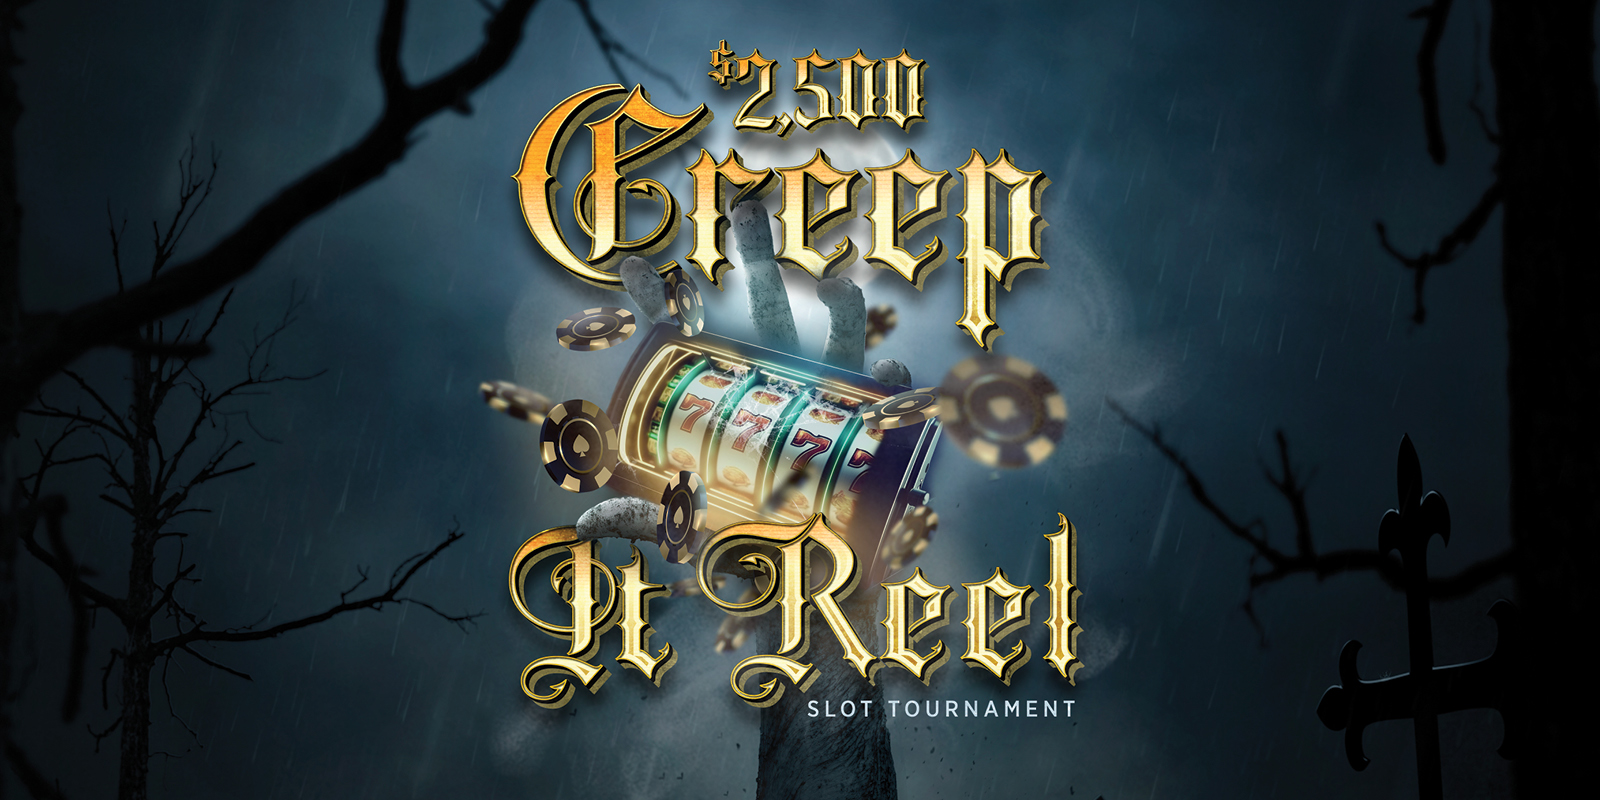 Creep it Reel slot tournament creative showing a spooky theme for an October casino event